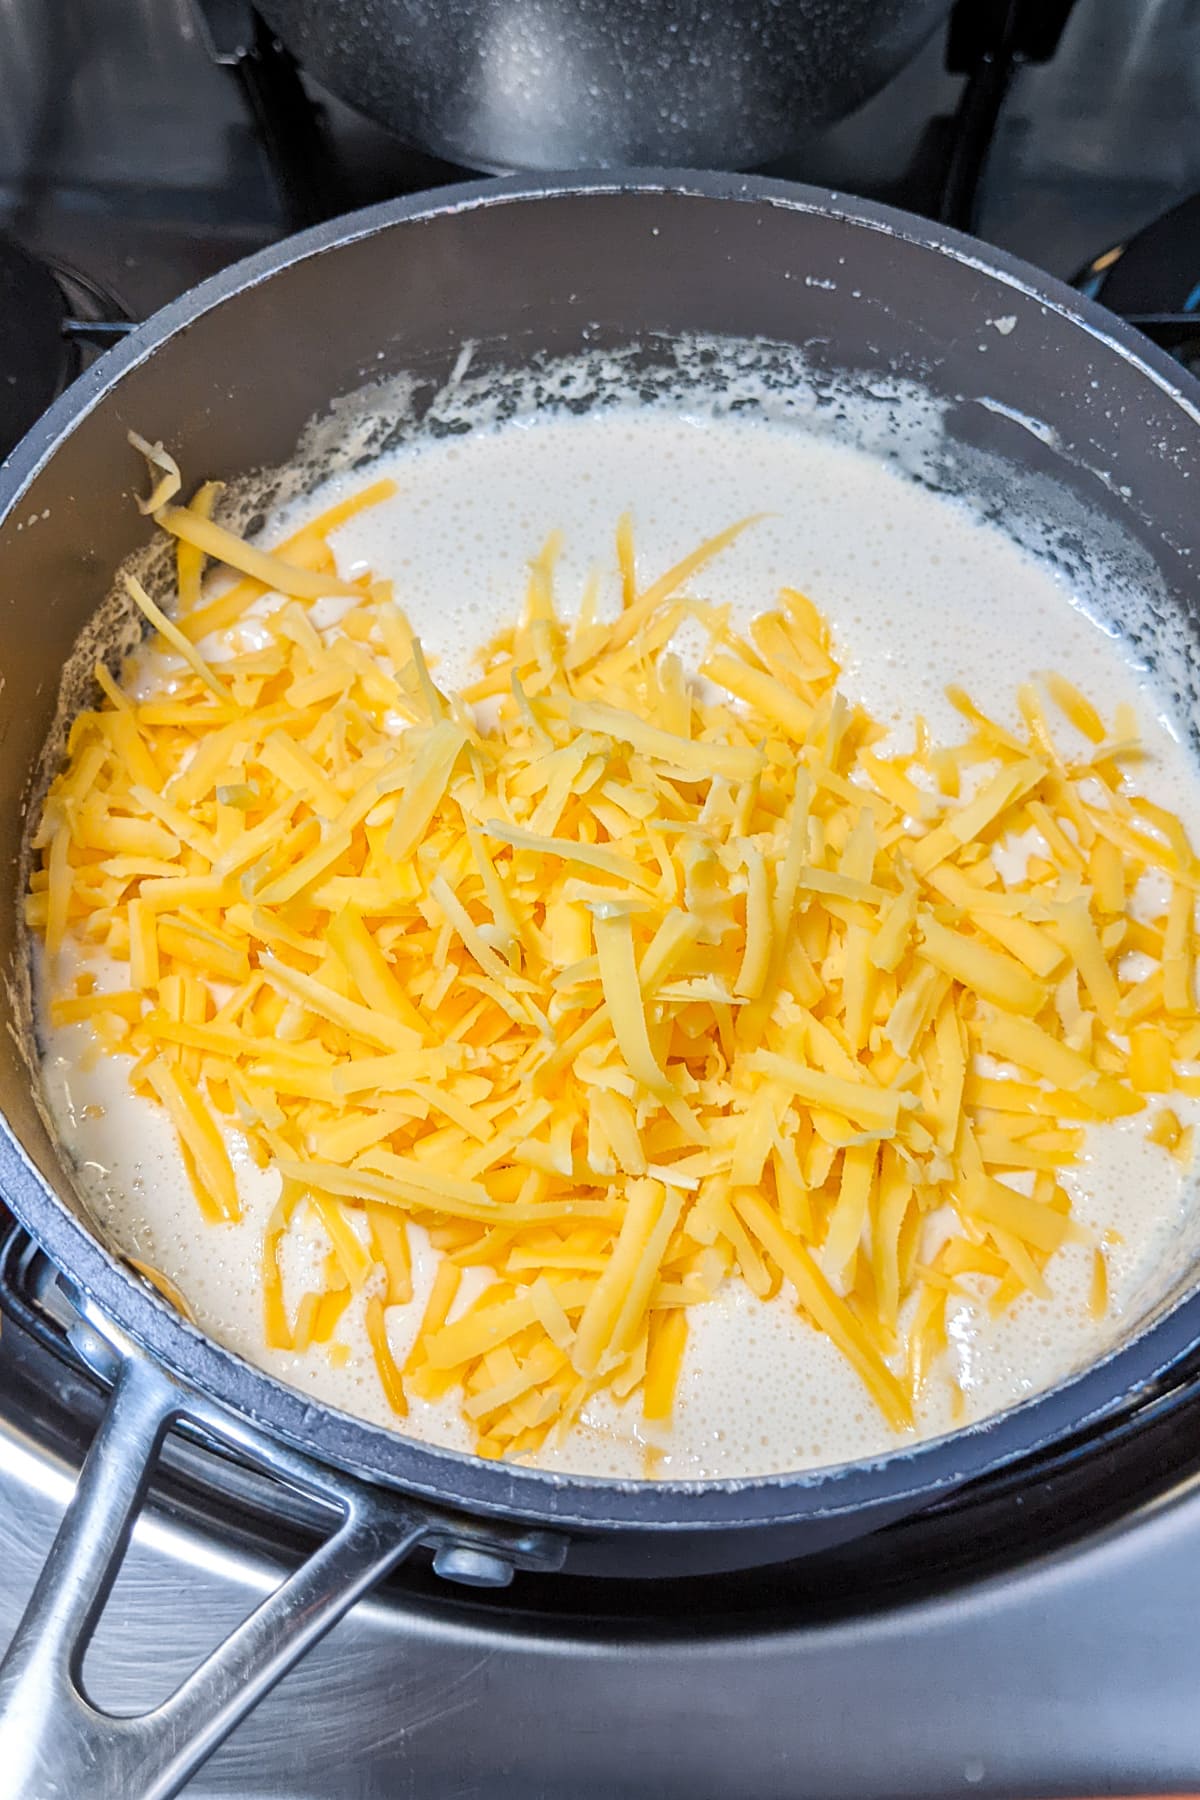 Shredded cheddar cheese over creamy sauce in a pan on the stove.